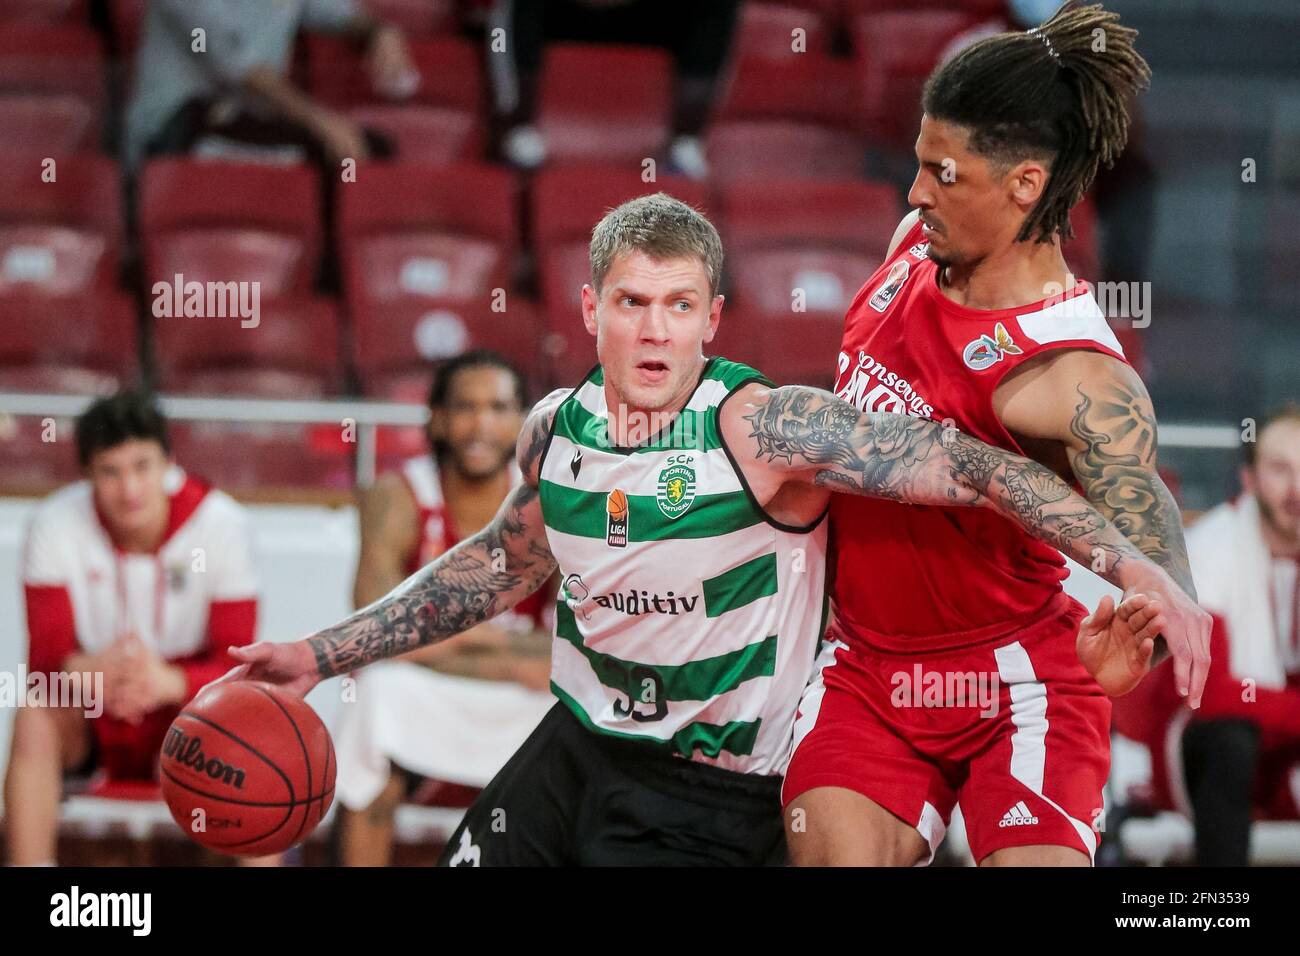 Lisbon, 05/13/2021 - This afternoon Sport Lisboa e Benfica hosted Sporting  Clube de Portugal at the Fidelidade pavilion at Estádio da Luz in the 3rd  game of the Semi-Finals of the LPB